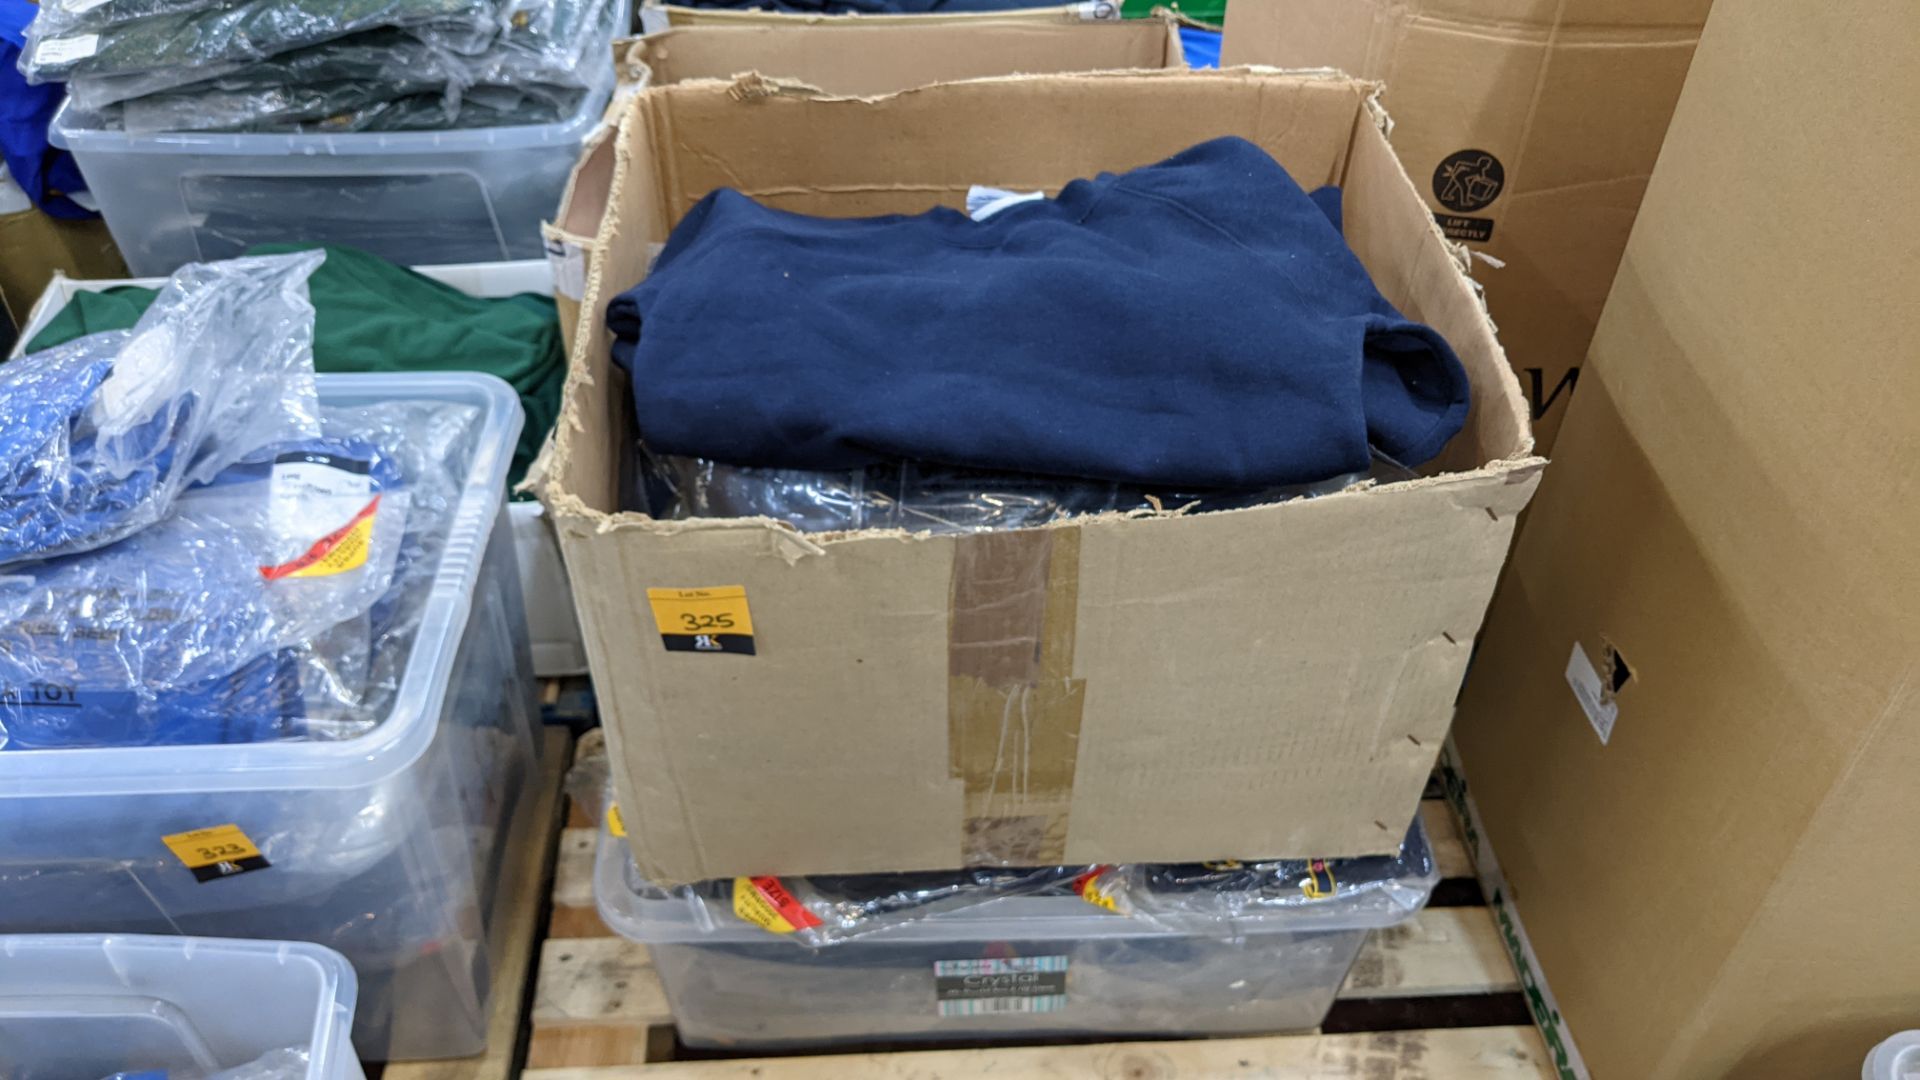 Approx 50 off navy children's sweatshirts - the contents of 1 large crate & 1 large box. NB crate e